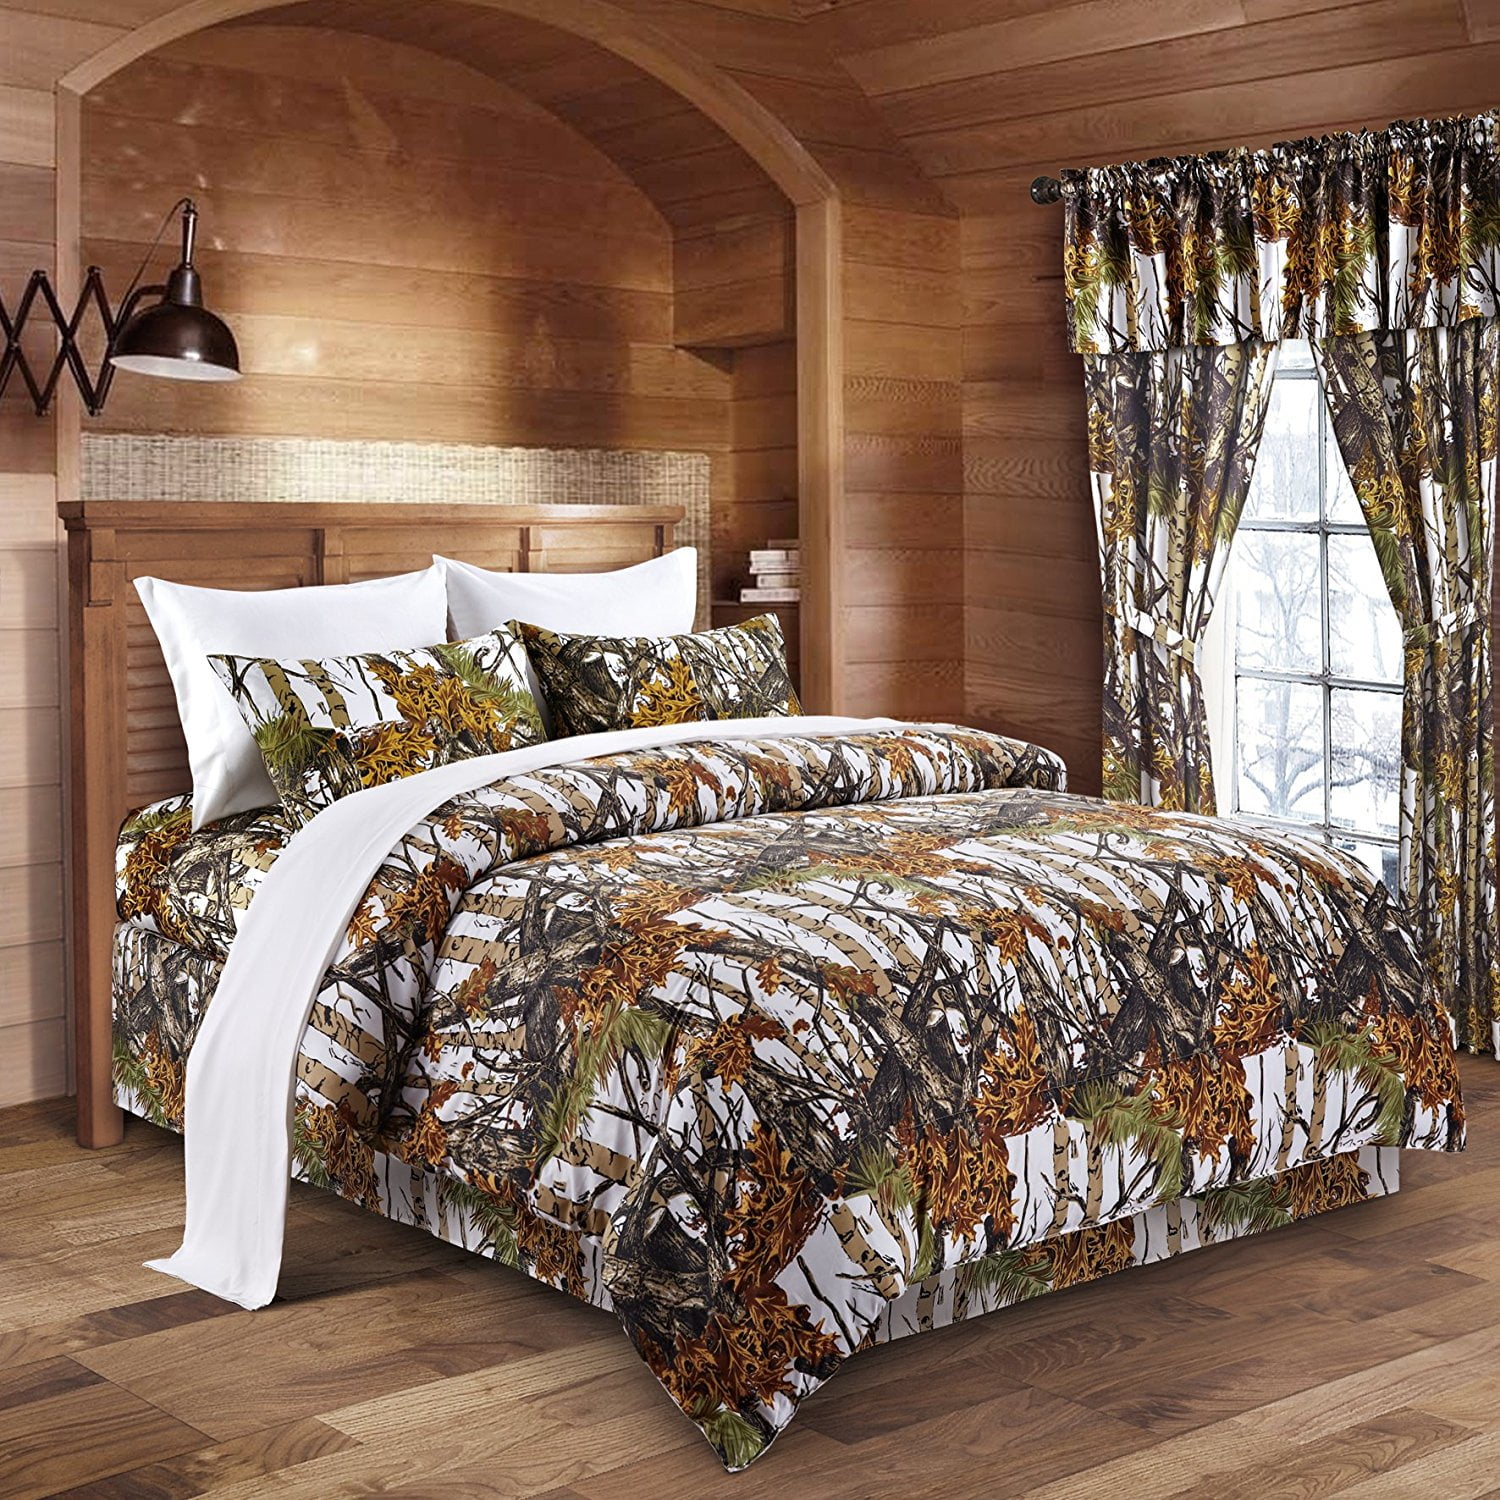 BROWN CAMO 7 PC COMFORTER NATURAL SHEET CAL KING SIZE CAMOUFLAGE WESTERN LODGE 